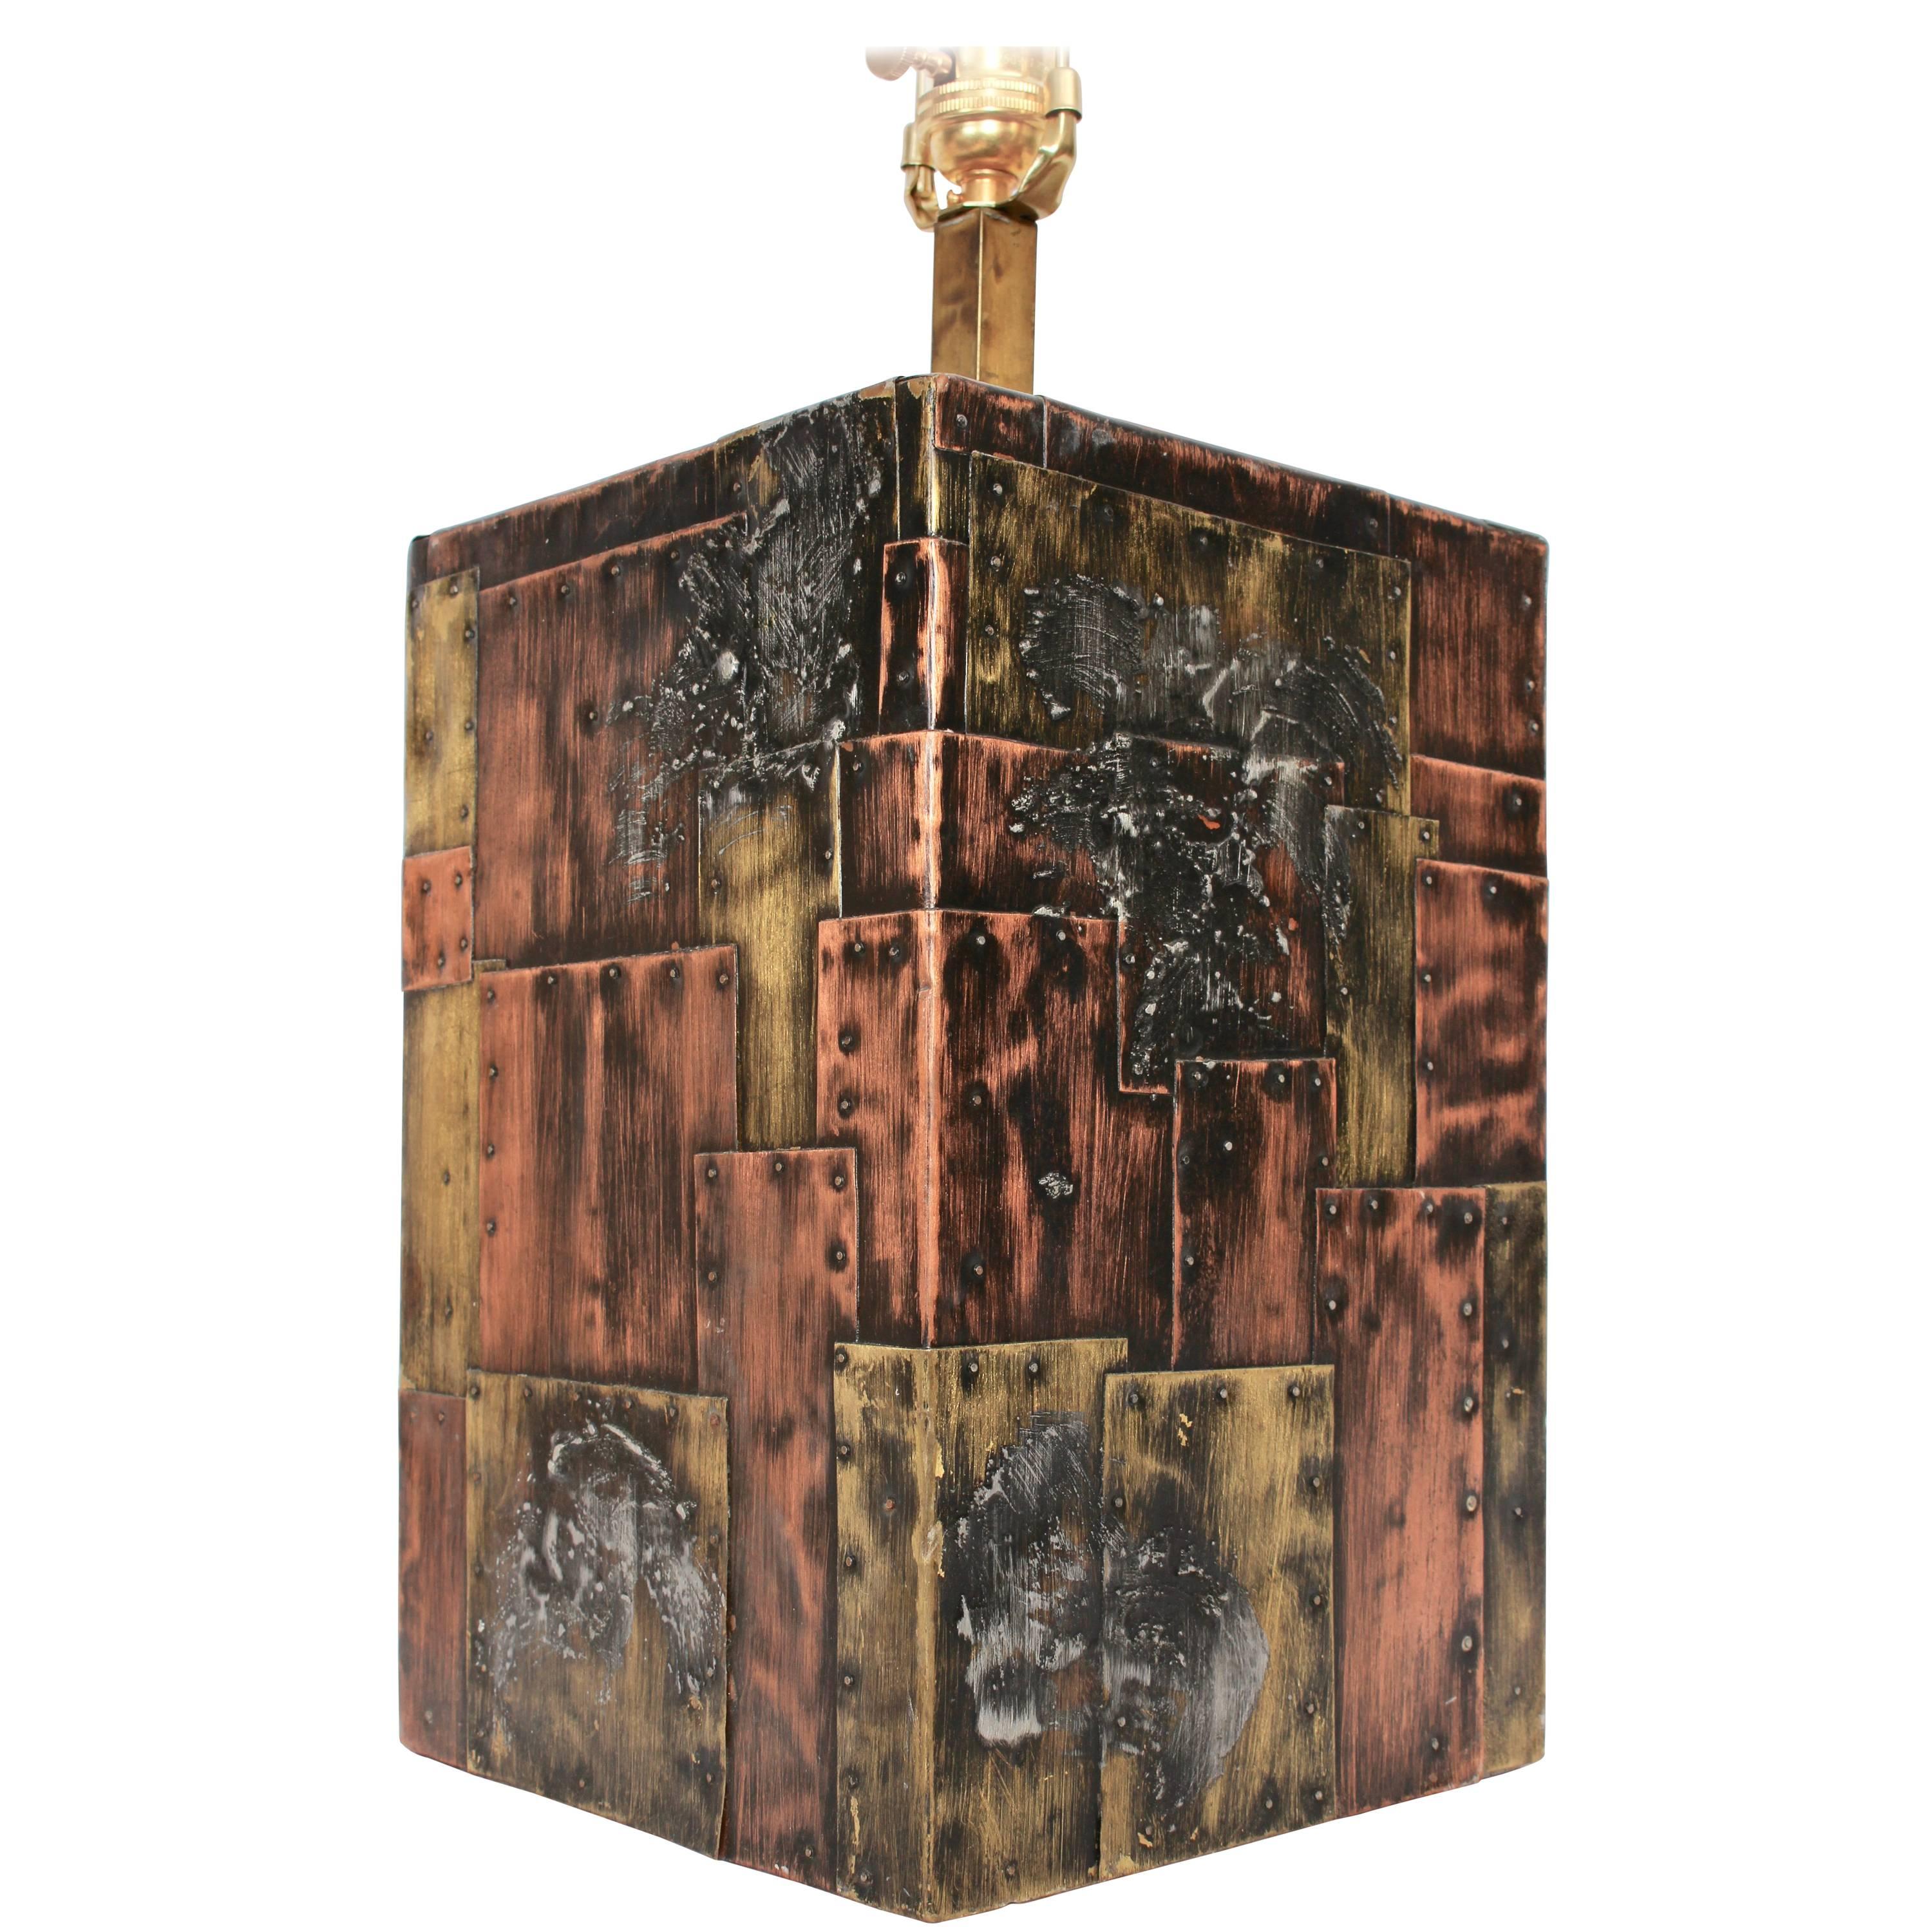 Paul Evans Studio Handcrafted CBP Patchwork Table Lamp in Copper, Brass and Pewter. Late 1960's. Featuring Colorful Copper and Brass Patchwork with Pewter splash and round nails as seen in early Studio pieces.  18 H to top socket. Lamp form 12 H.